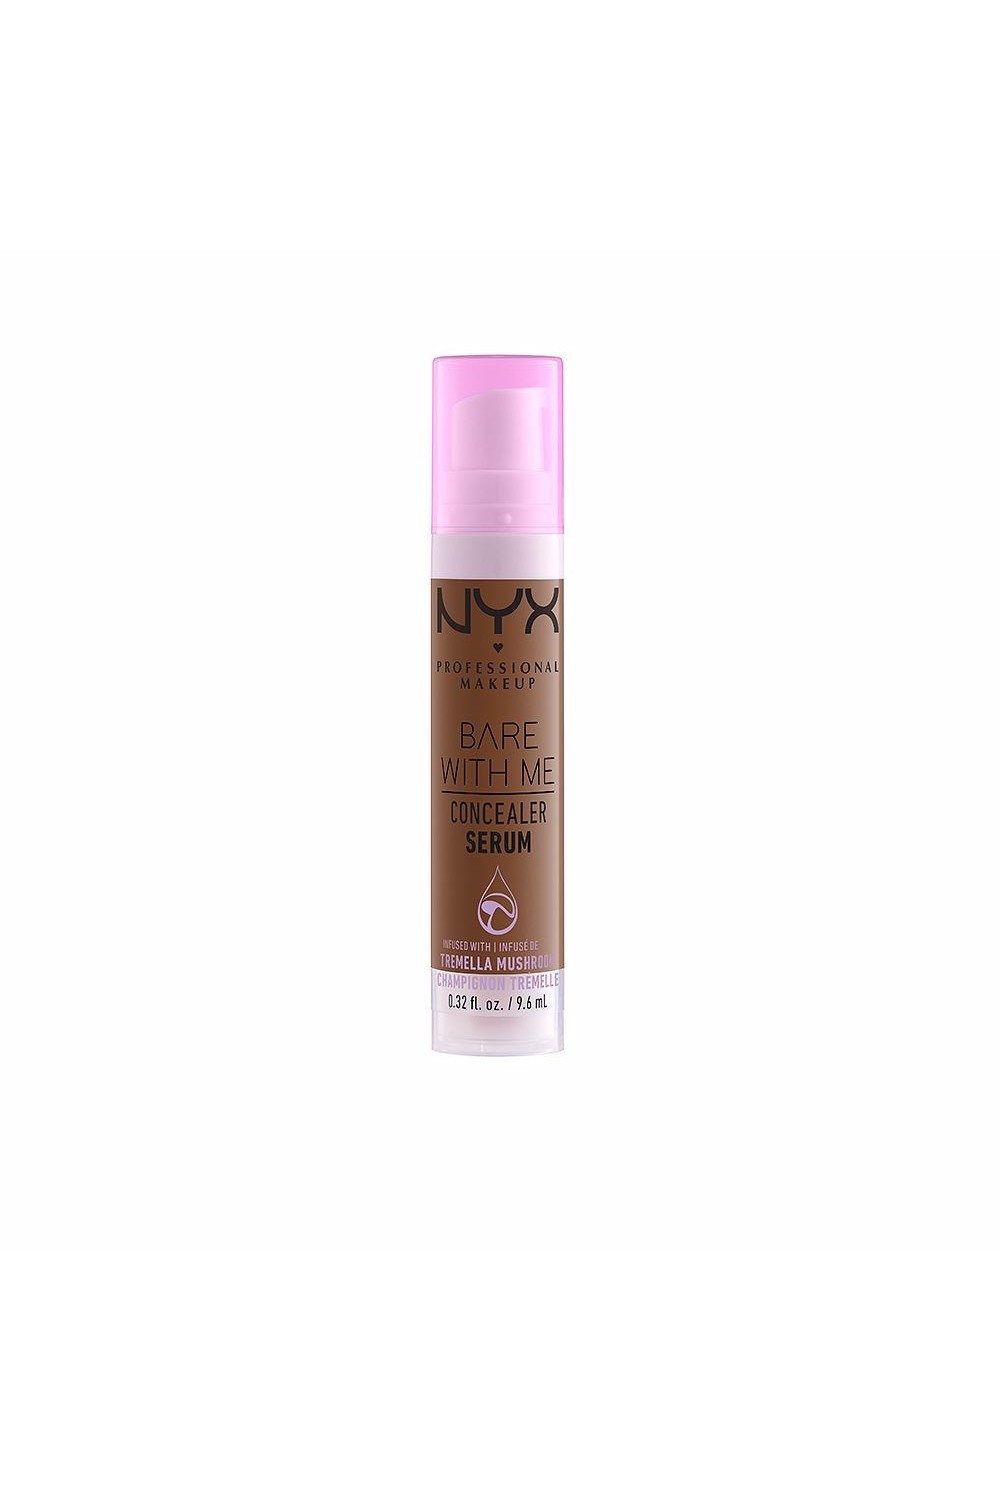 Nyx Bare With Me Concealer Serum 11-Mocha